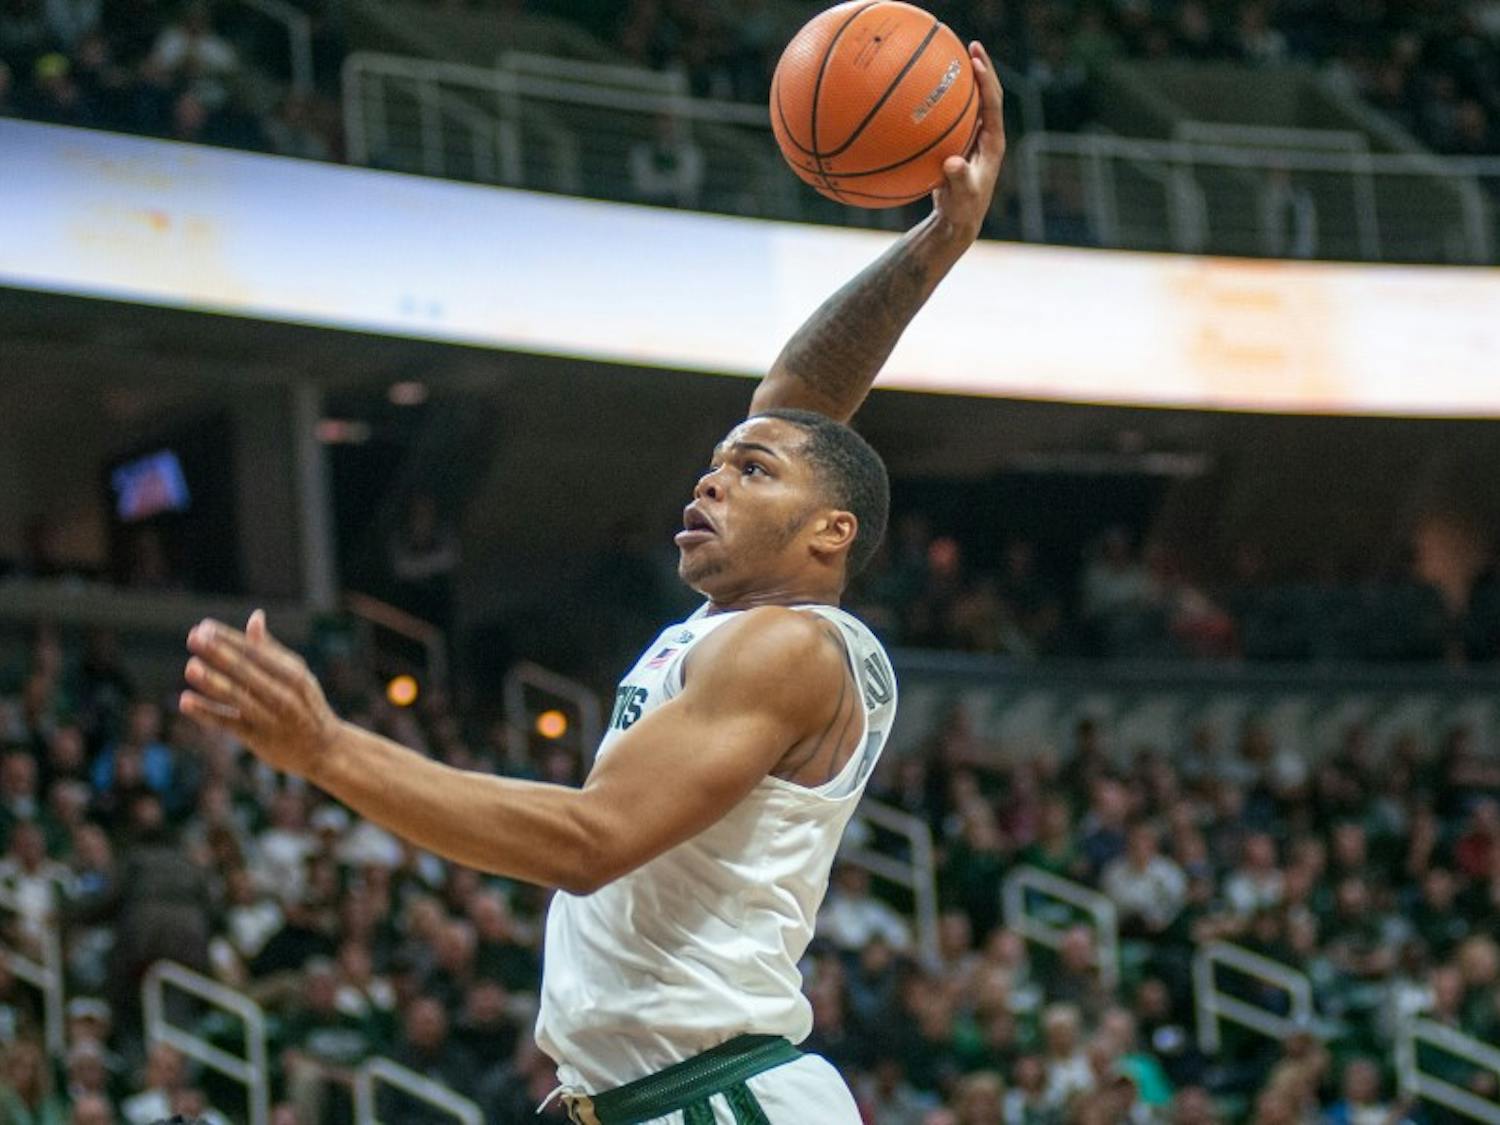 Sophomore forward Miles Bridges (22) dunks the basketball during the game against Ferris State on Oct. 26, 2017, at the Breslin Center. The Spartans defeated the Bulldogs, 80-72.